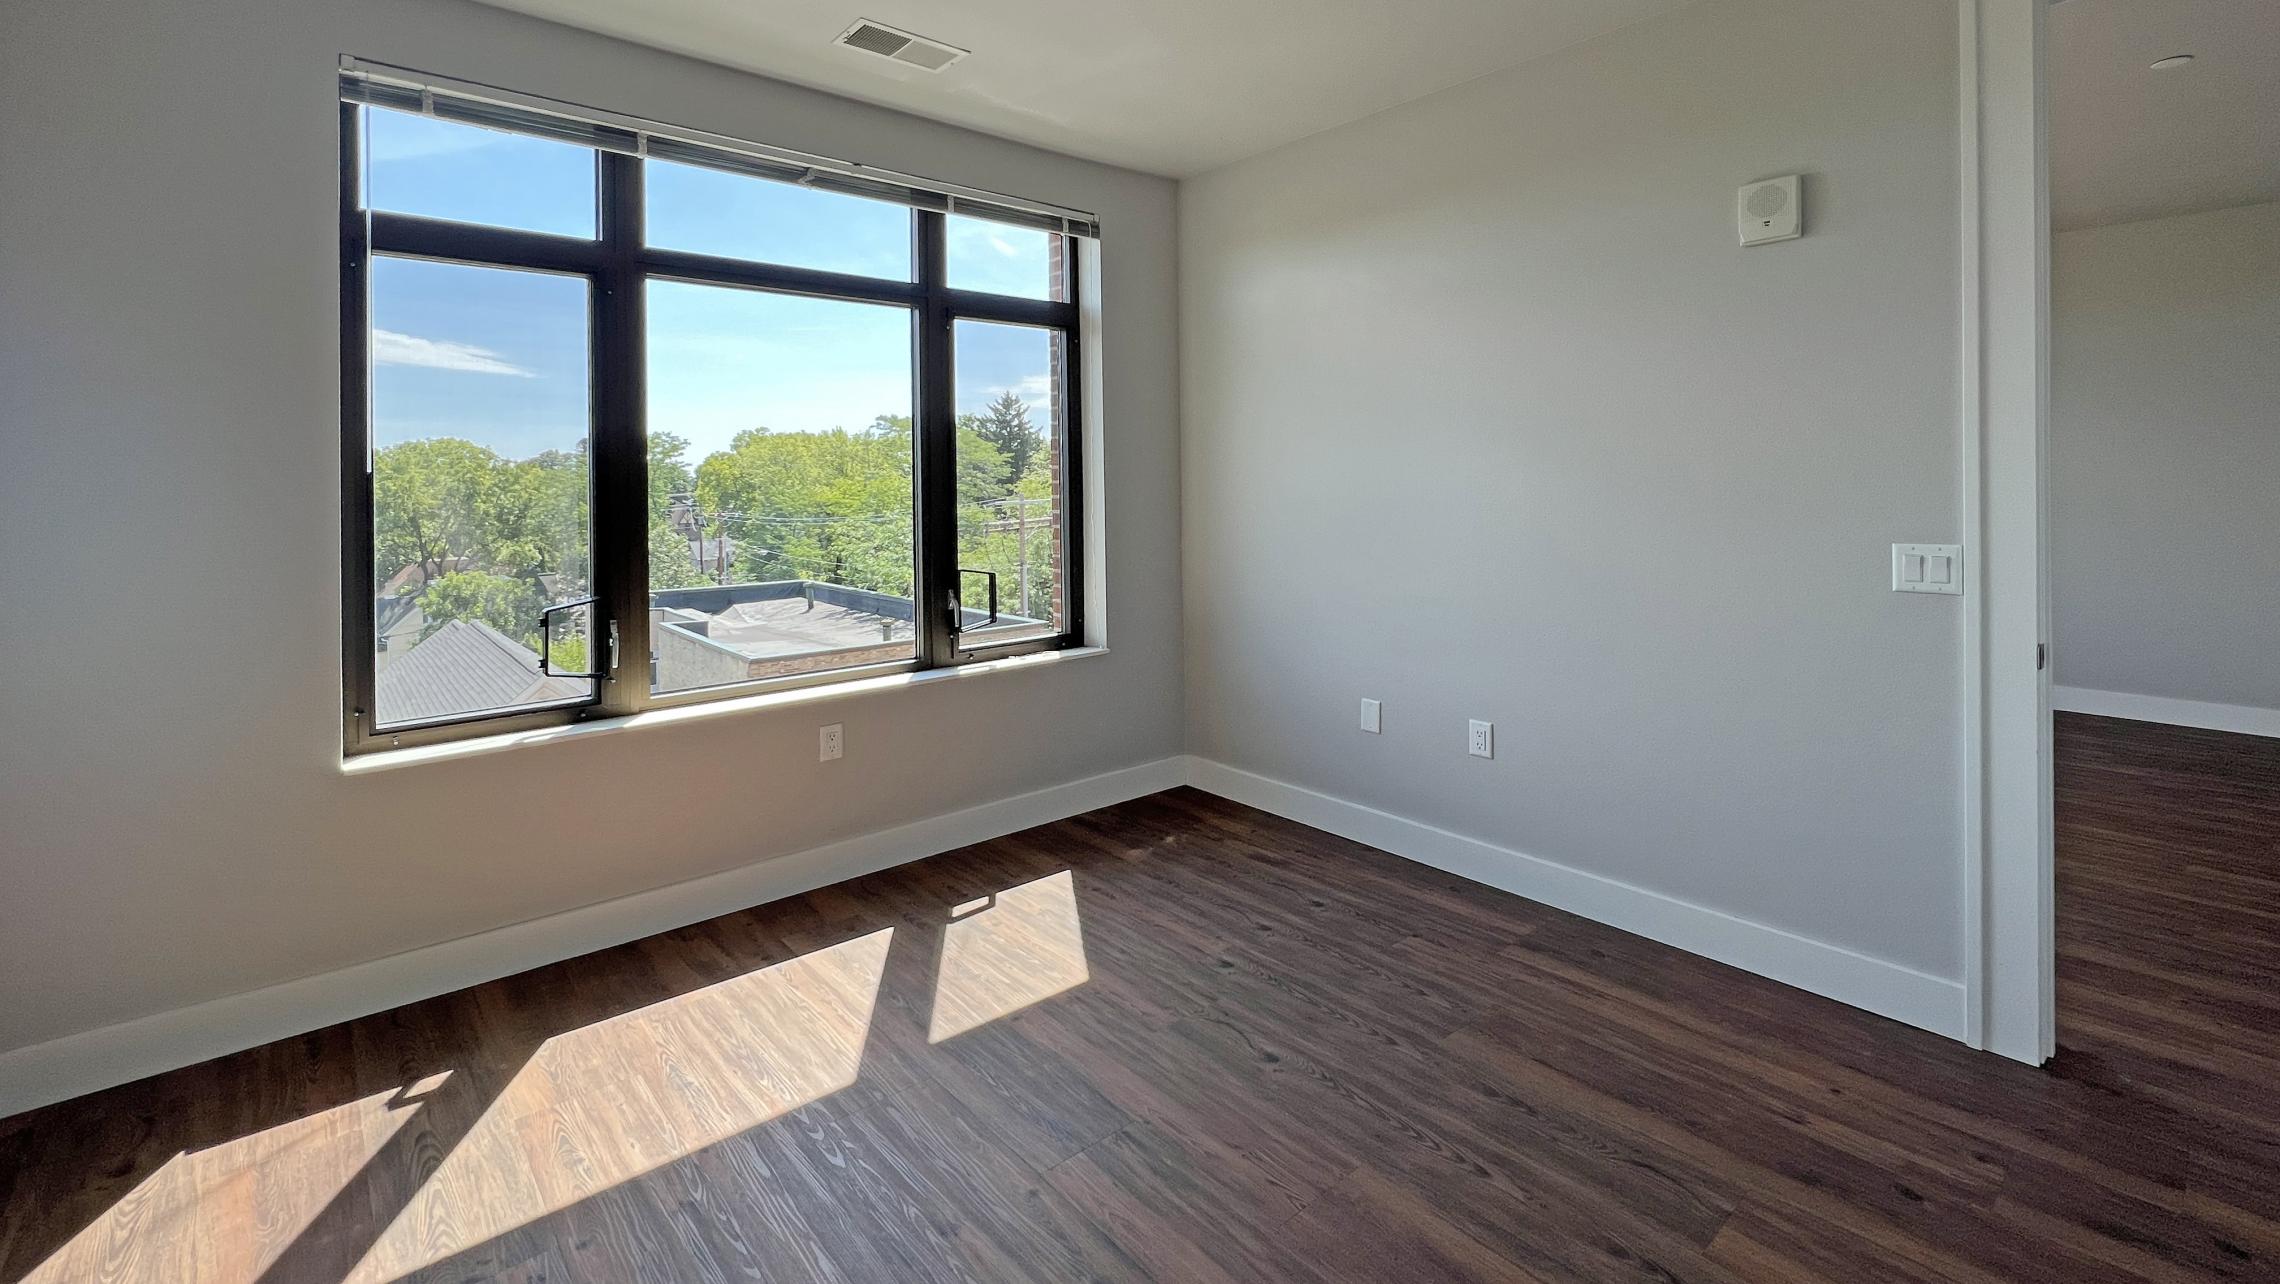 1722-Monroe-Apartment-413-One-Bedroom-Bathroom-Camp-Randall-Luxury-Living-Kitchen-Design-Rooftop-Terrace-Views-City-Madison-Fitness-Lounge-Lifestyle-Capitol